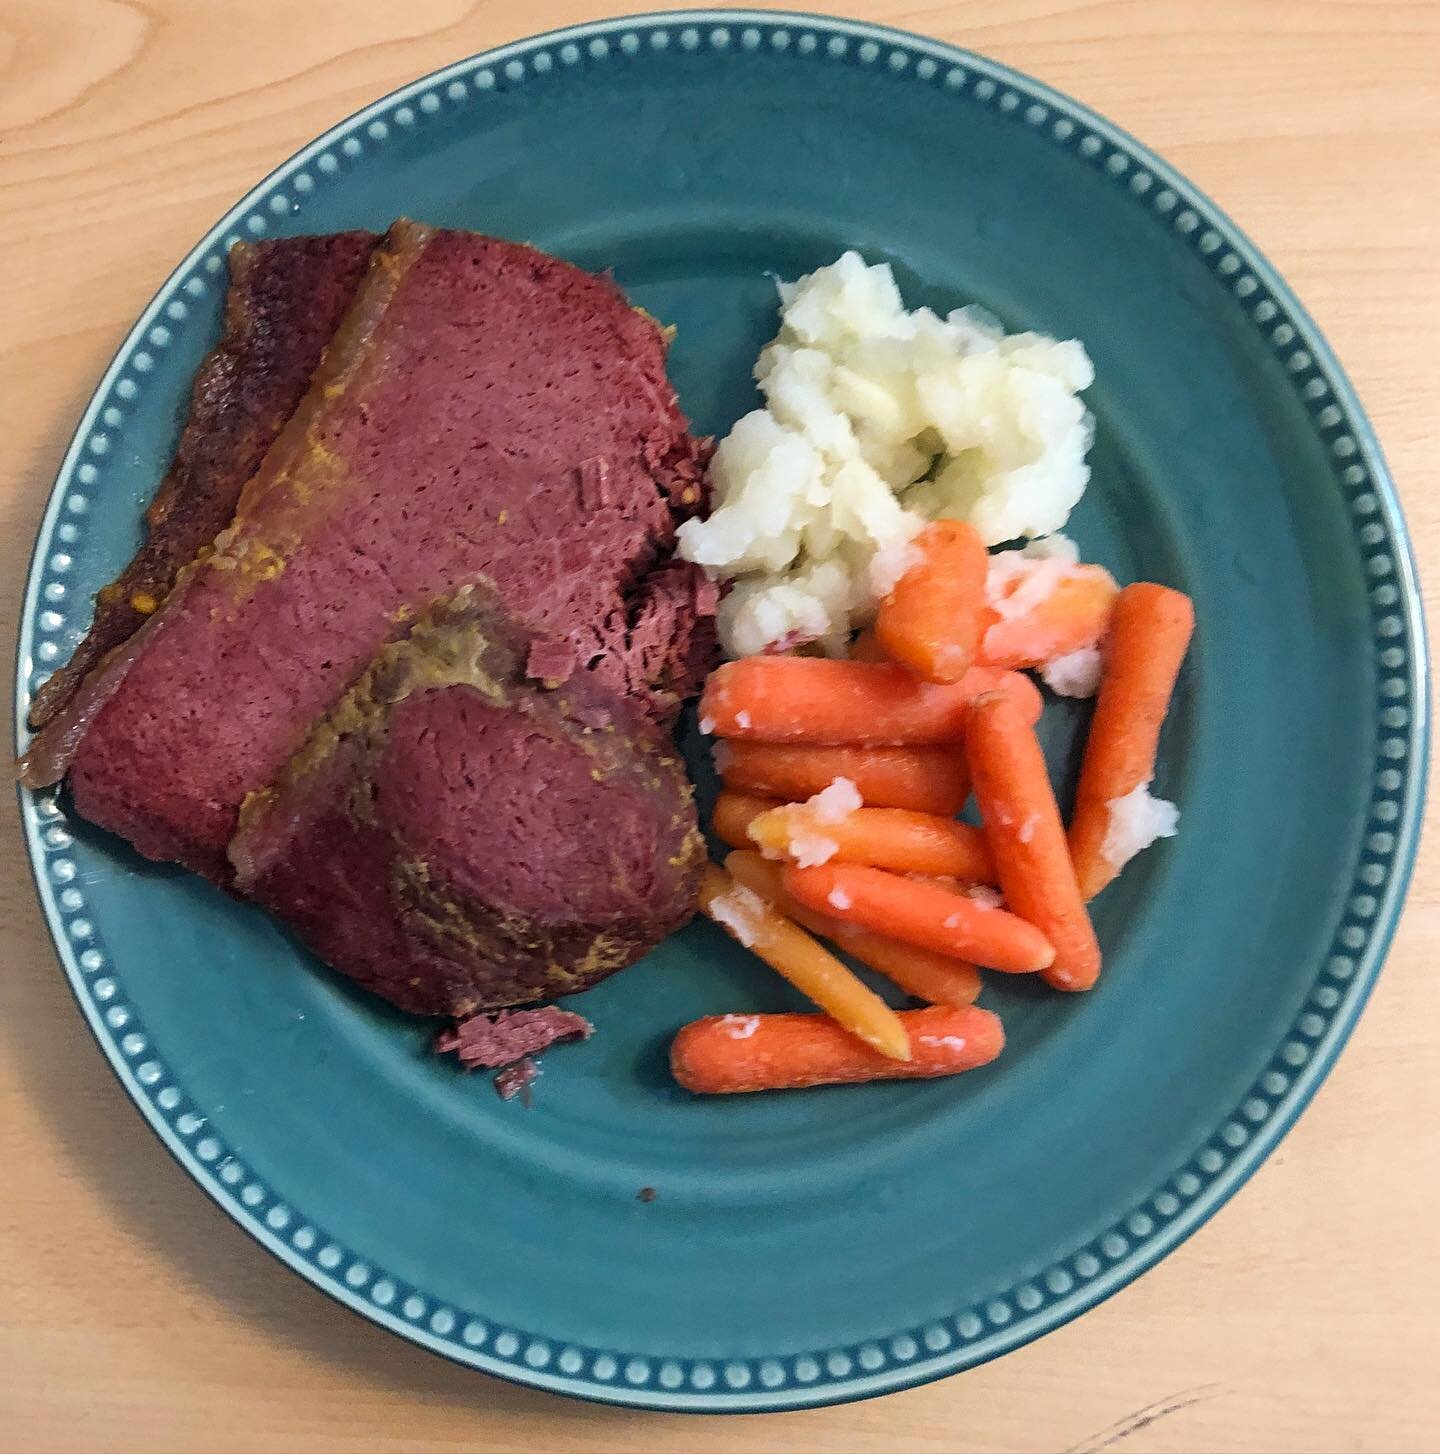 Didn&rsquo;t find a pot of gold... but I did have some corned beef, cabbage, carrots &amp; potatoes!🍀Happy St. Patty&rsquo;s Day, I hope the luck of the Irish ☘️ brings goodness to us all. 🤗✨ Xx💚Lindsey #gftraveler yummy corned beef from @costcogl